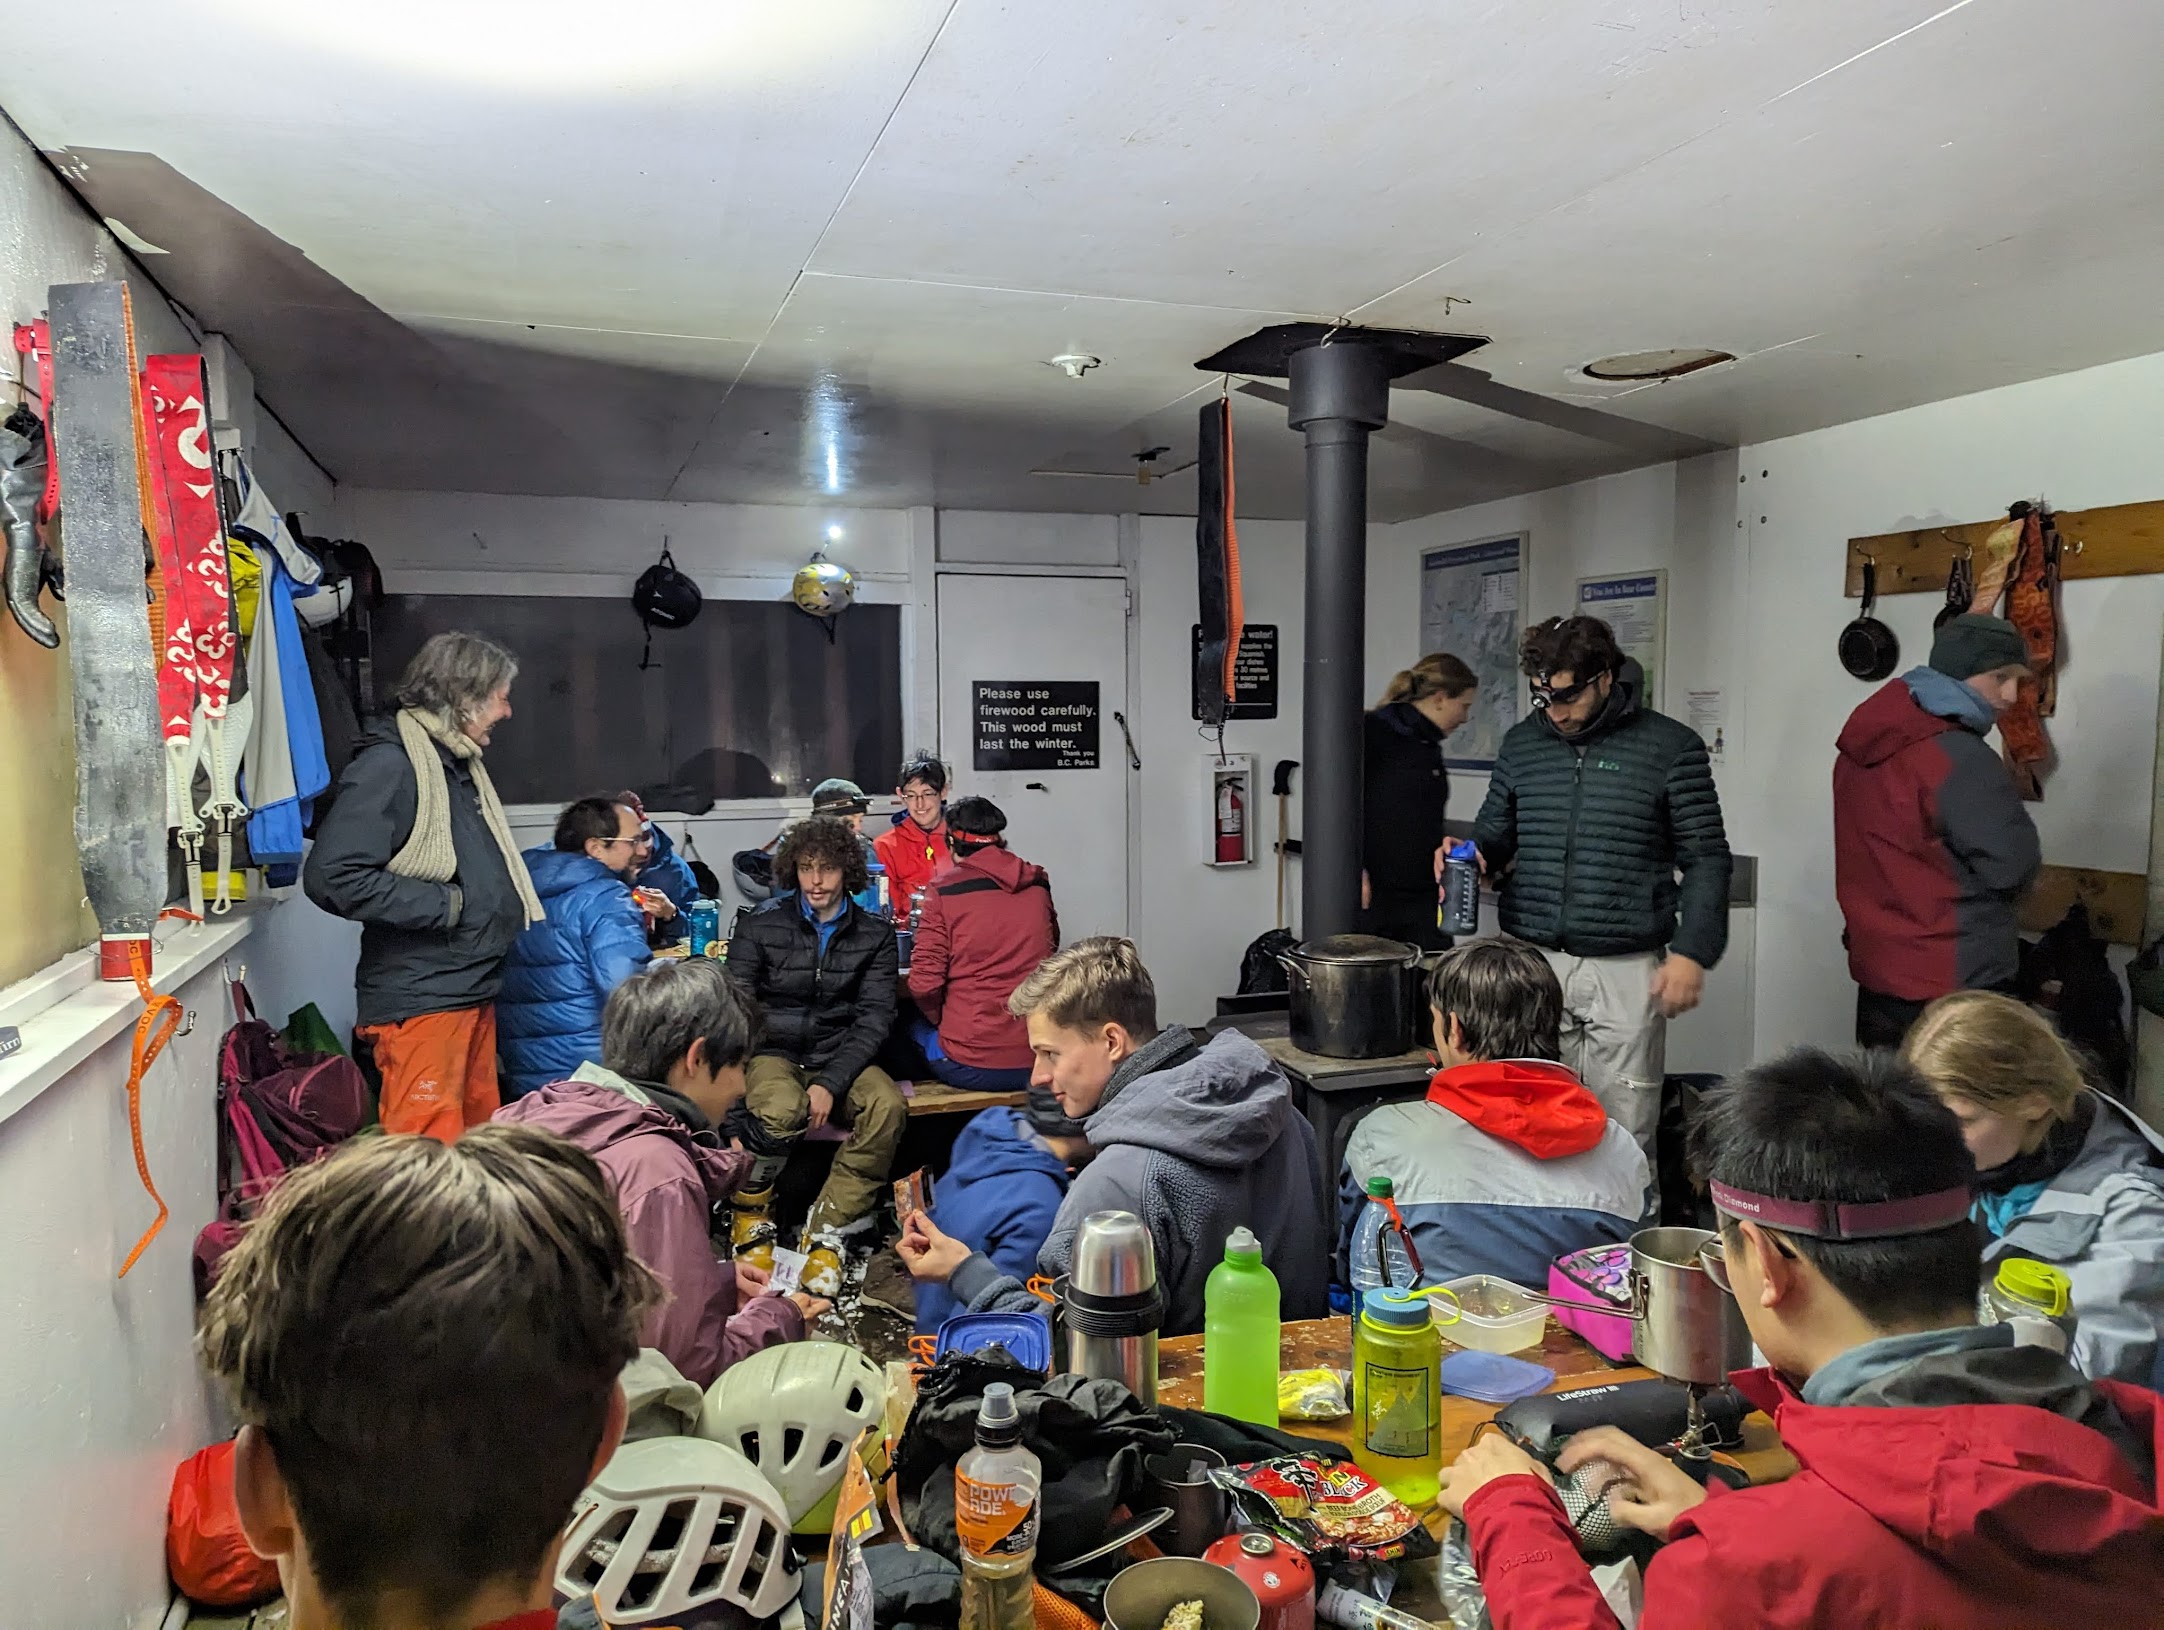 Crowd of people in the warming hut